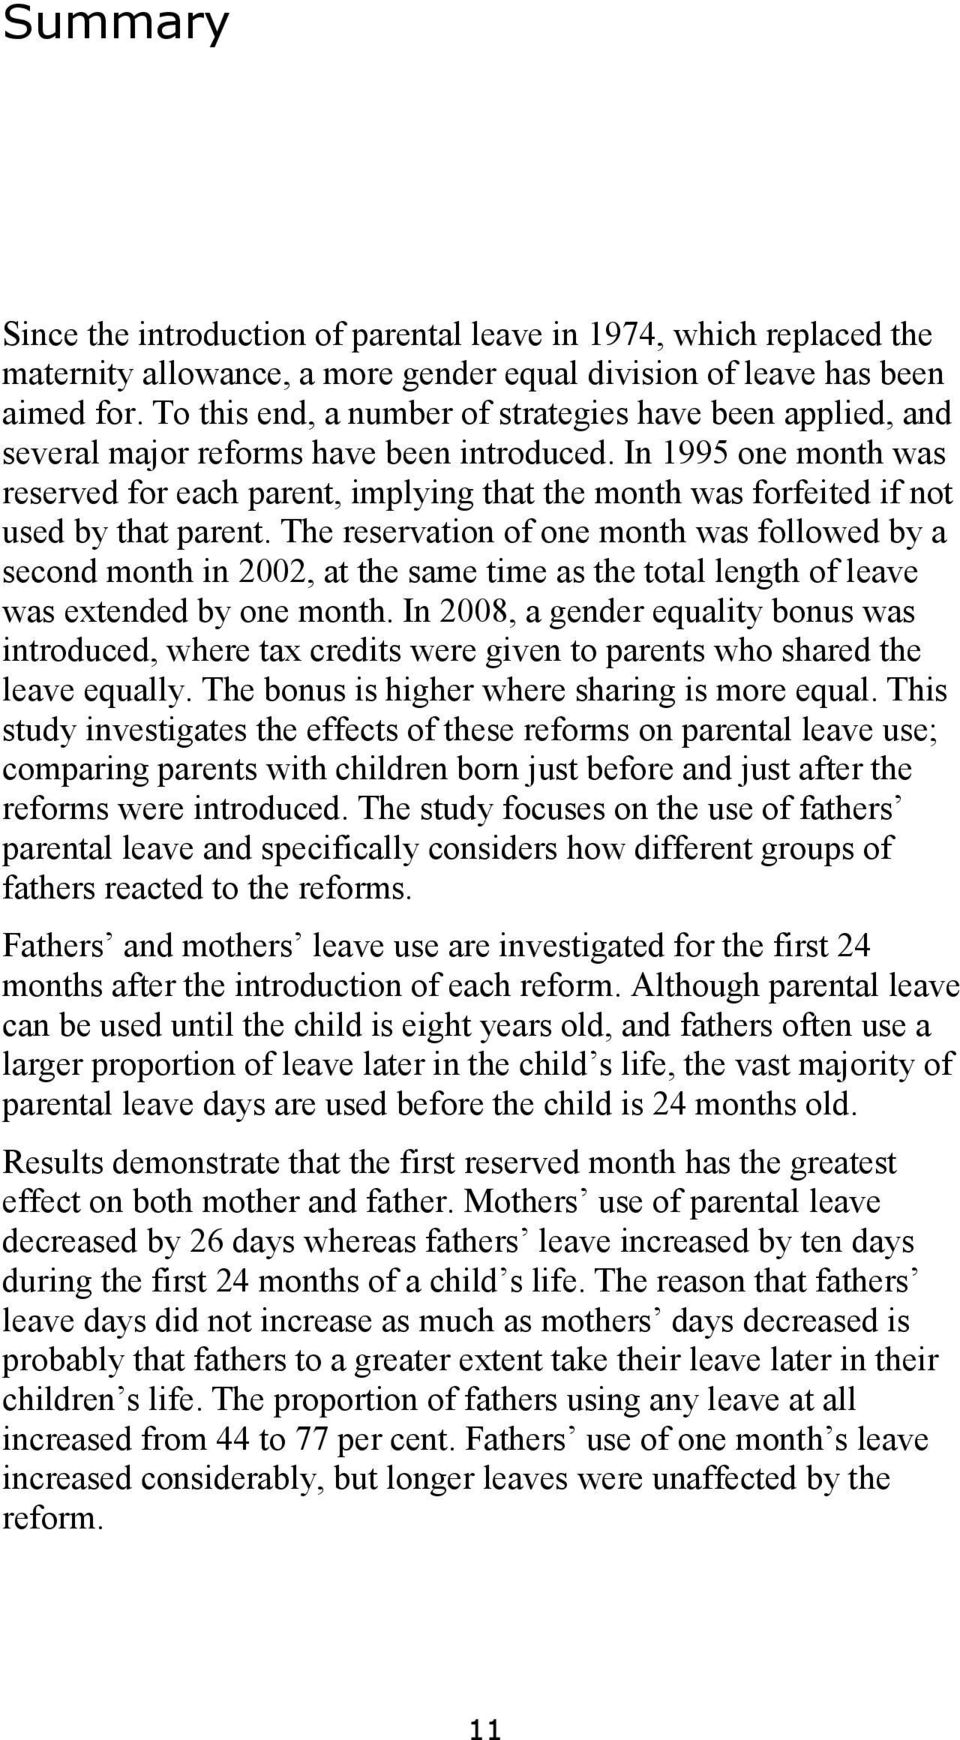 In 1995 one month was reserved for each parent, implying that the month was forfeited if not used by that parent.